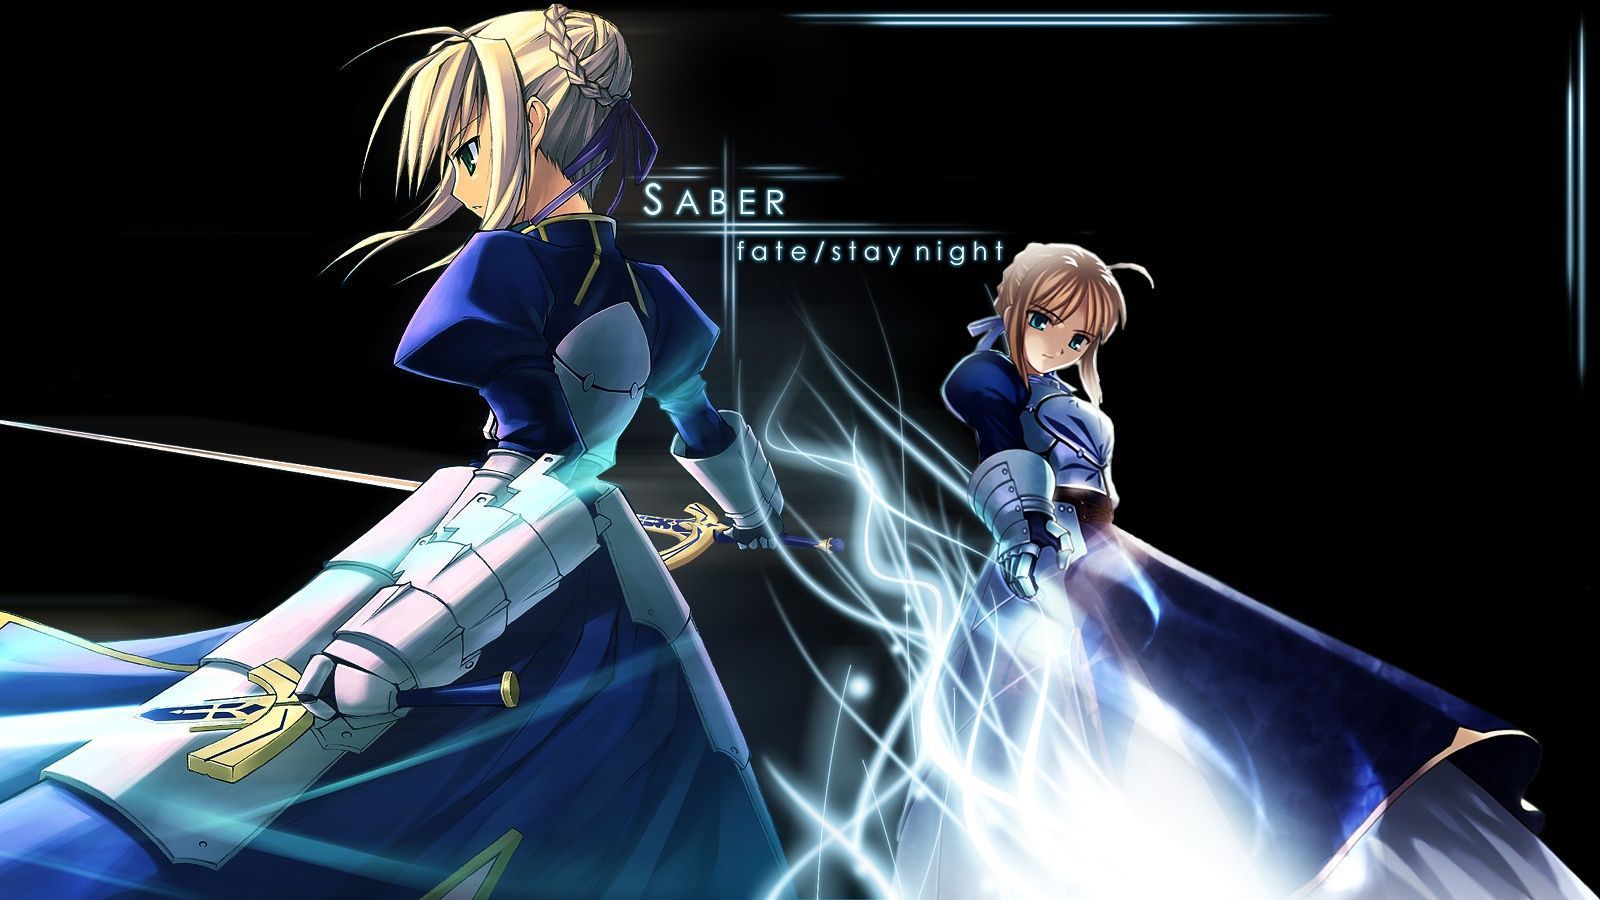 Gallery for - fate stay night saber wallpaper